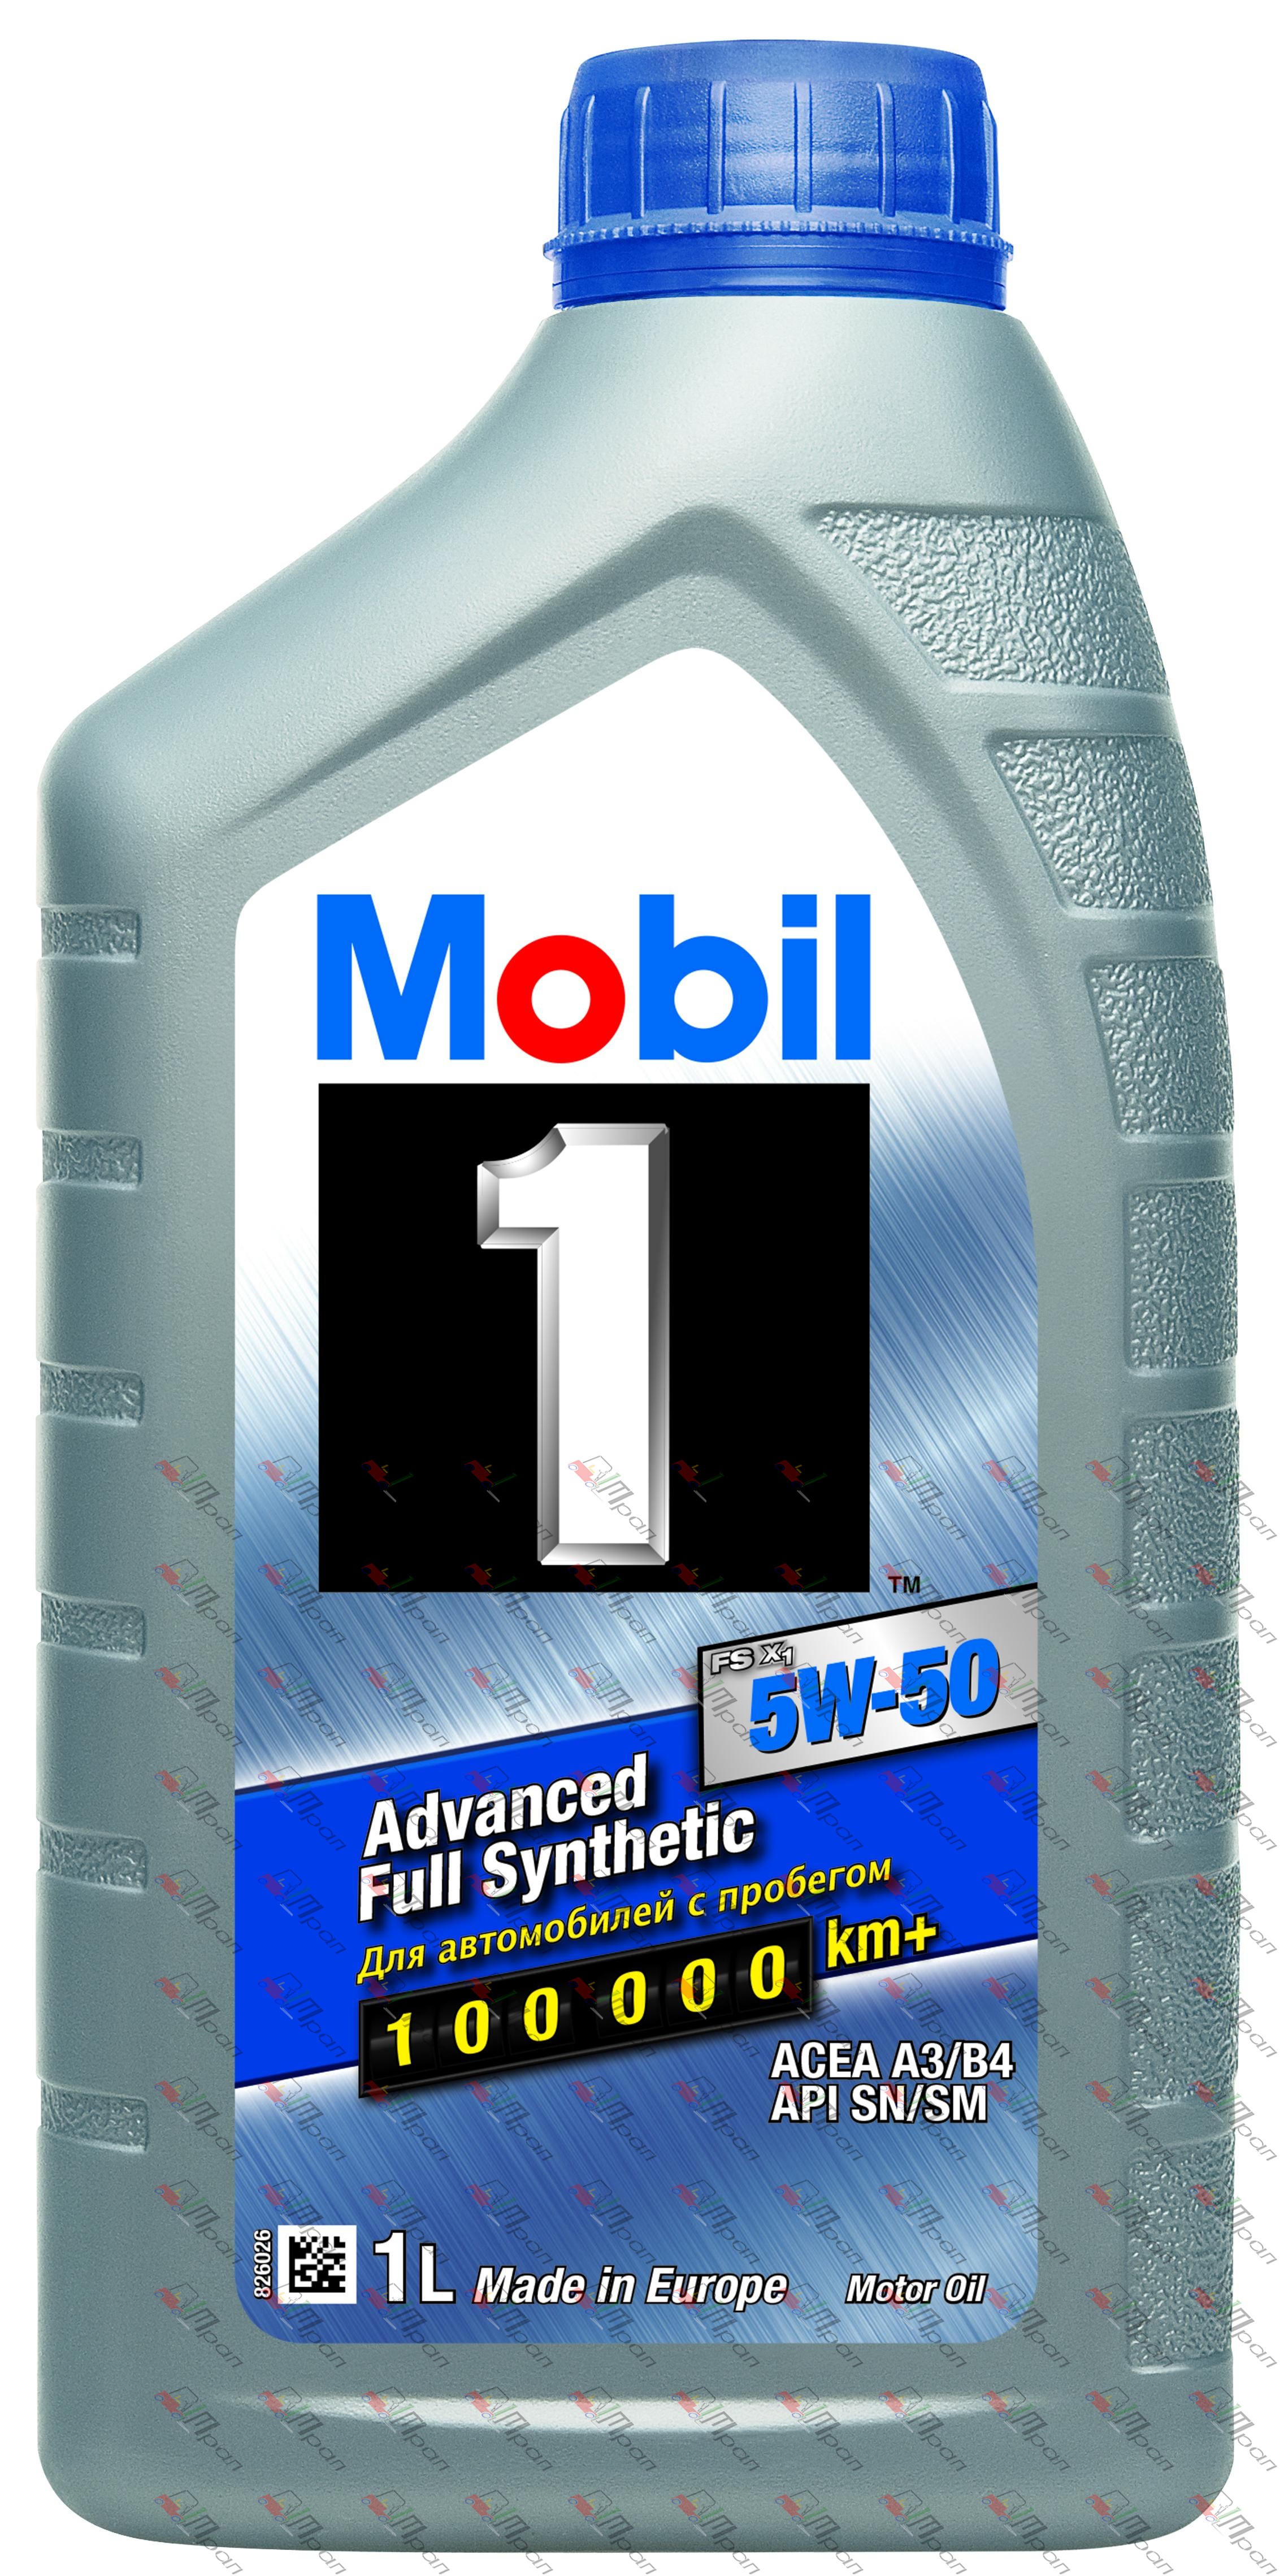 Mobil Масло моторное синтетич. Mobil 1 FS X1 5w50 1л